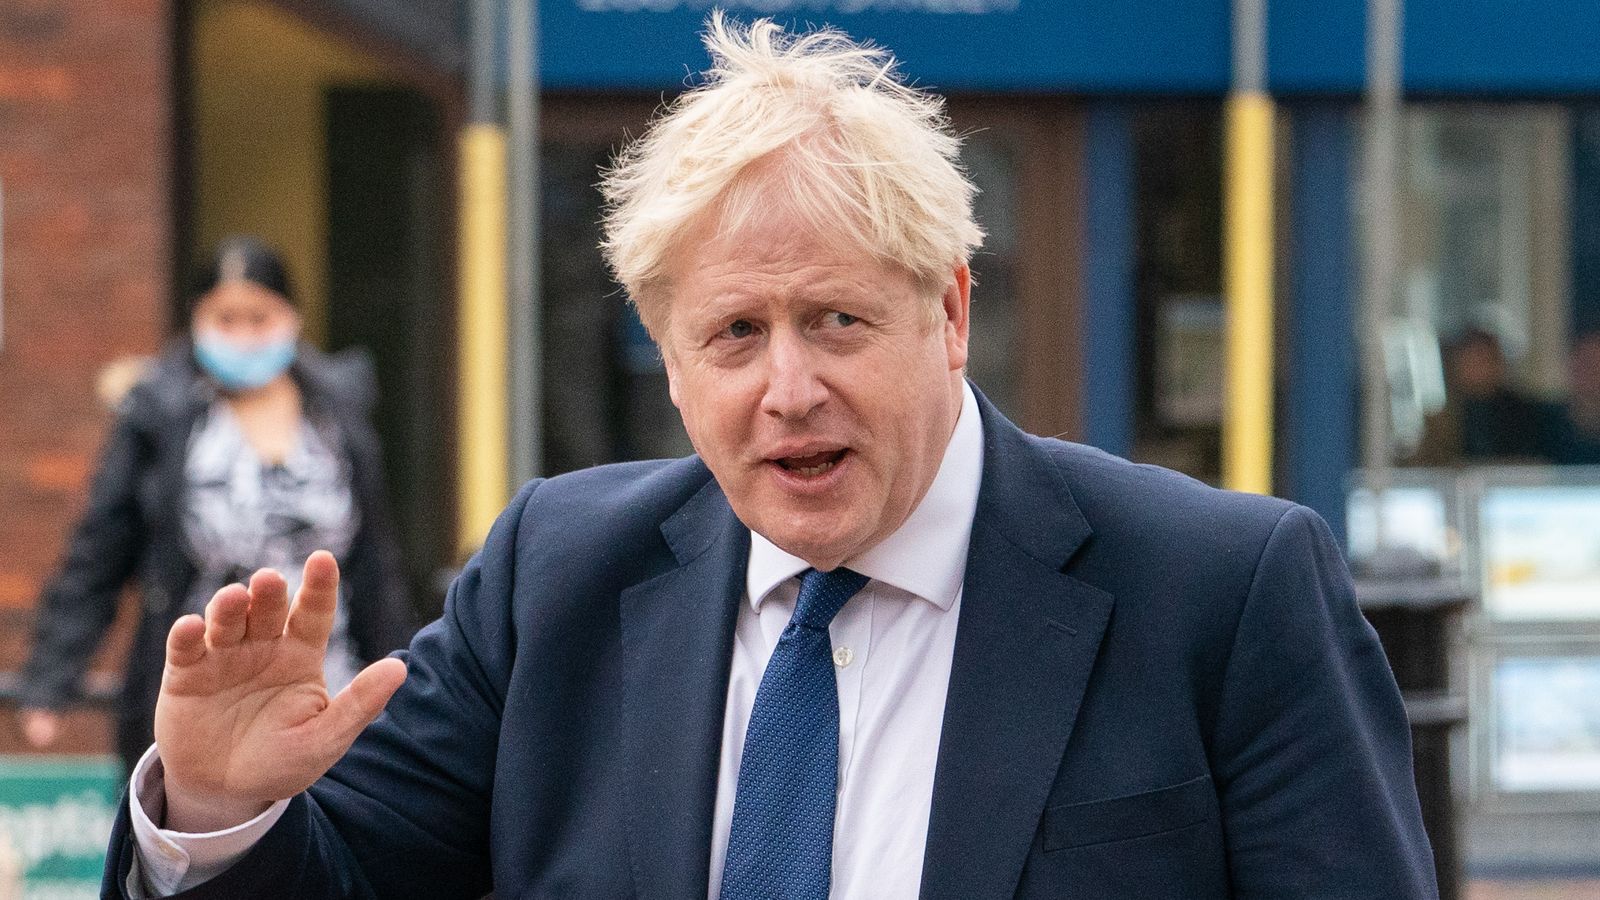 Boris Johnson thought Downing Street lockdown party 'was a work event', Nadhim Zahawi says